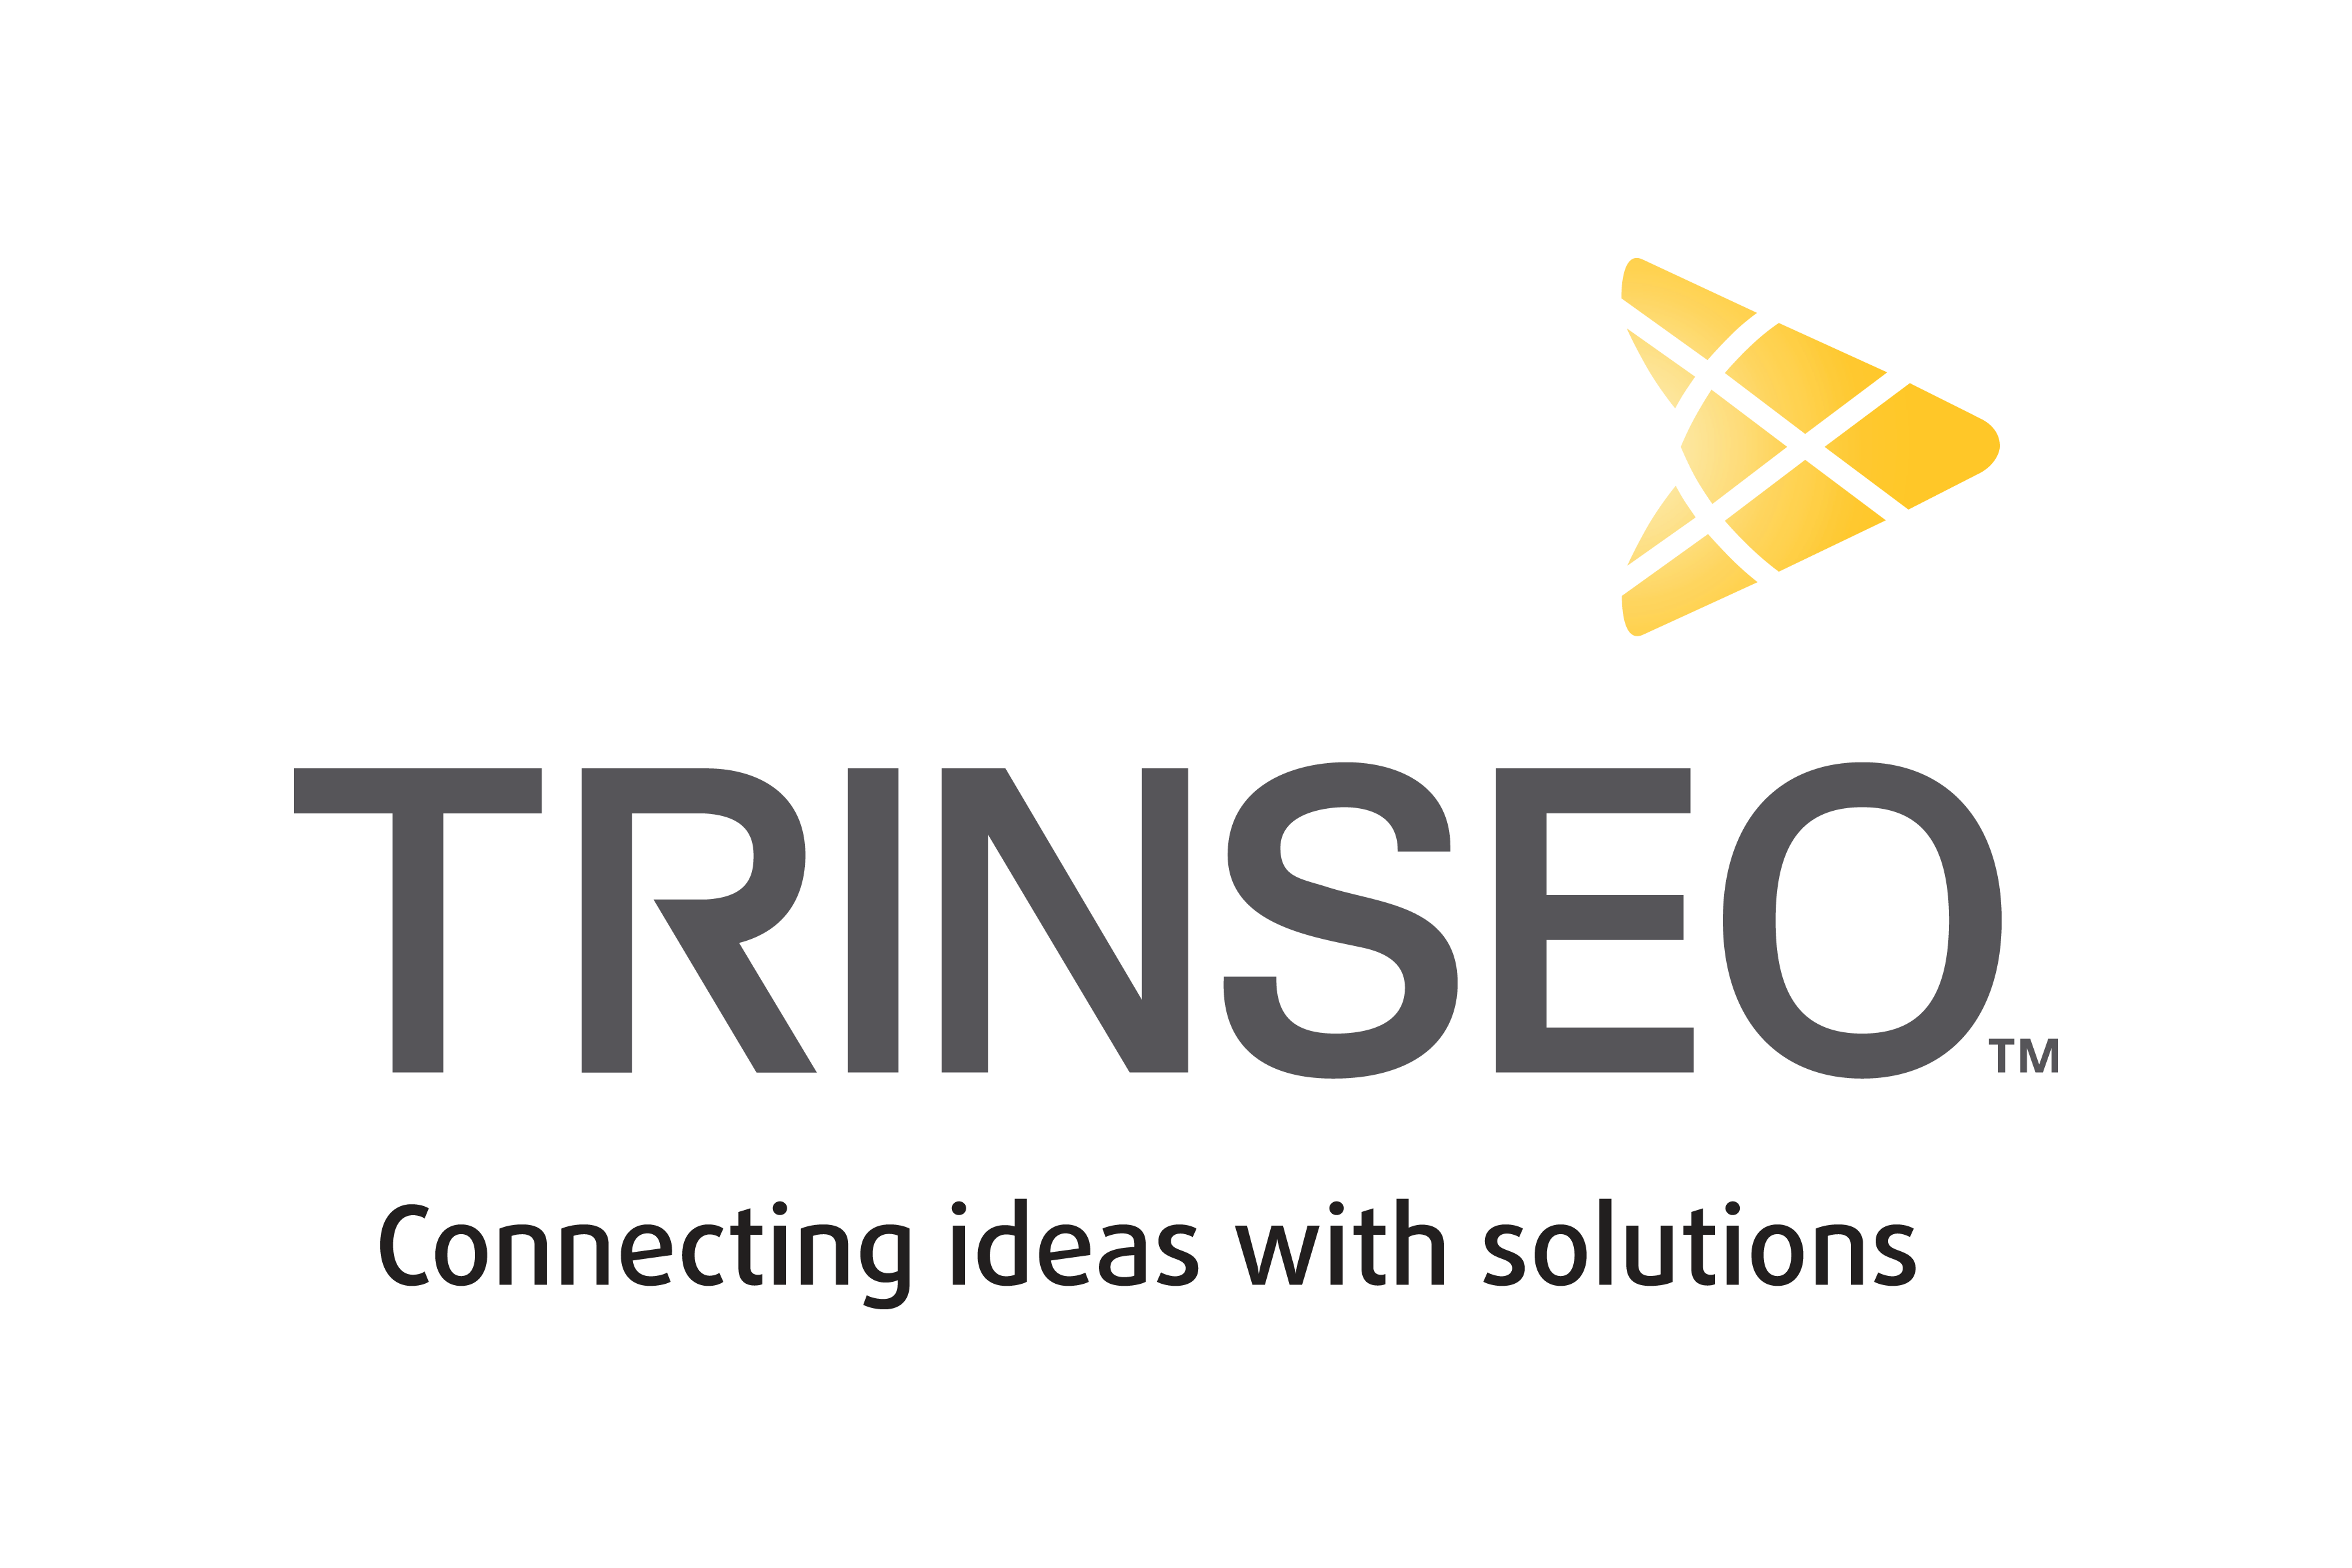 Trinseo logo in color with tagline